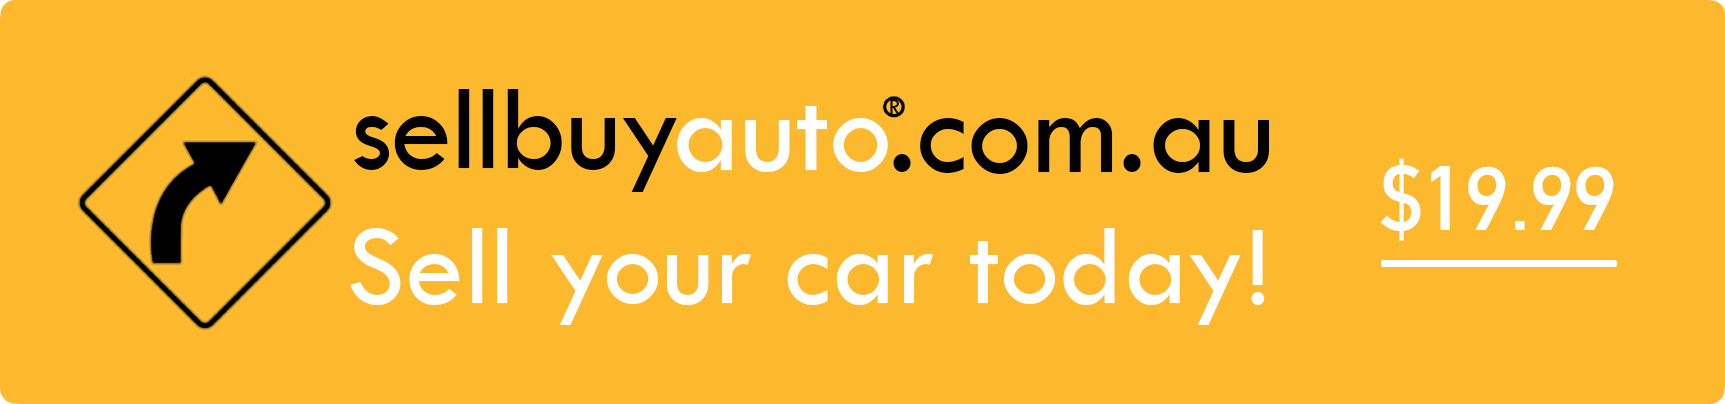 SellBuyAuto Sell your car today